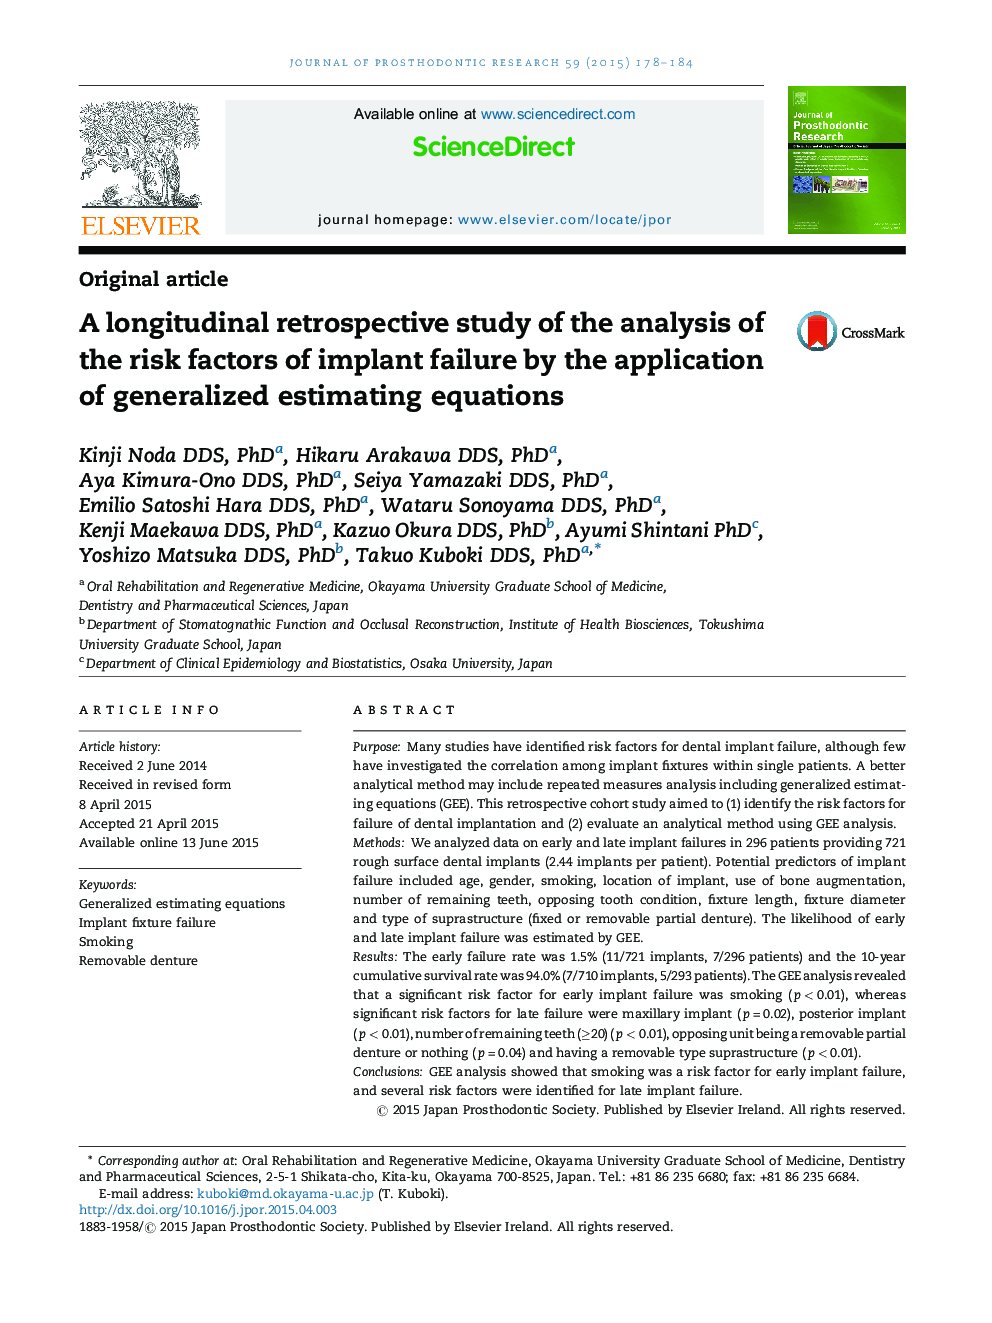 A longitudinal retrospective study of the analysis of the risk factors of implant failure by the application of generalized estimating equations